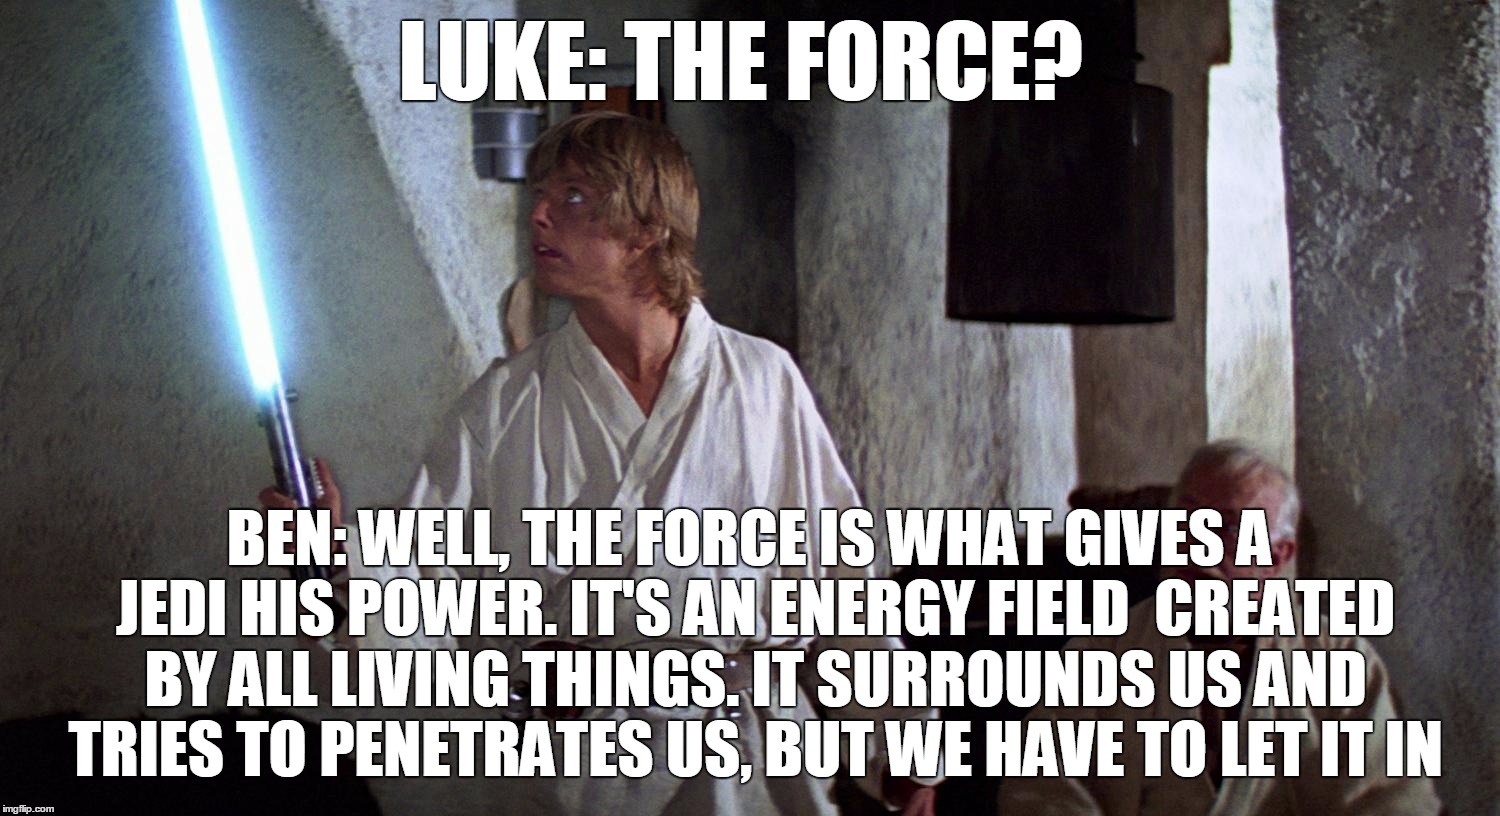 let it in | LUKE: THE FORCE? BEN: WELL, THE FORCE IS WHAT GIVES A JEDI HIS POWER. IT'S AN ENERGY FIELD CREATED BY ALL LIVING THINGS. IT SURROUNDS US AN | image tagged in star wars force awakens han luke leia force | made w/ Imgflip meme maker